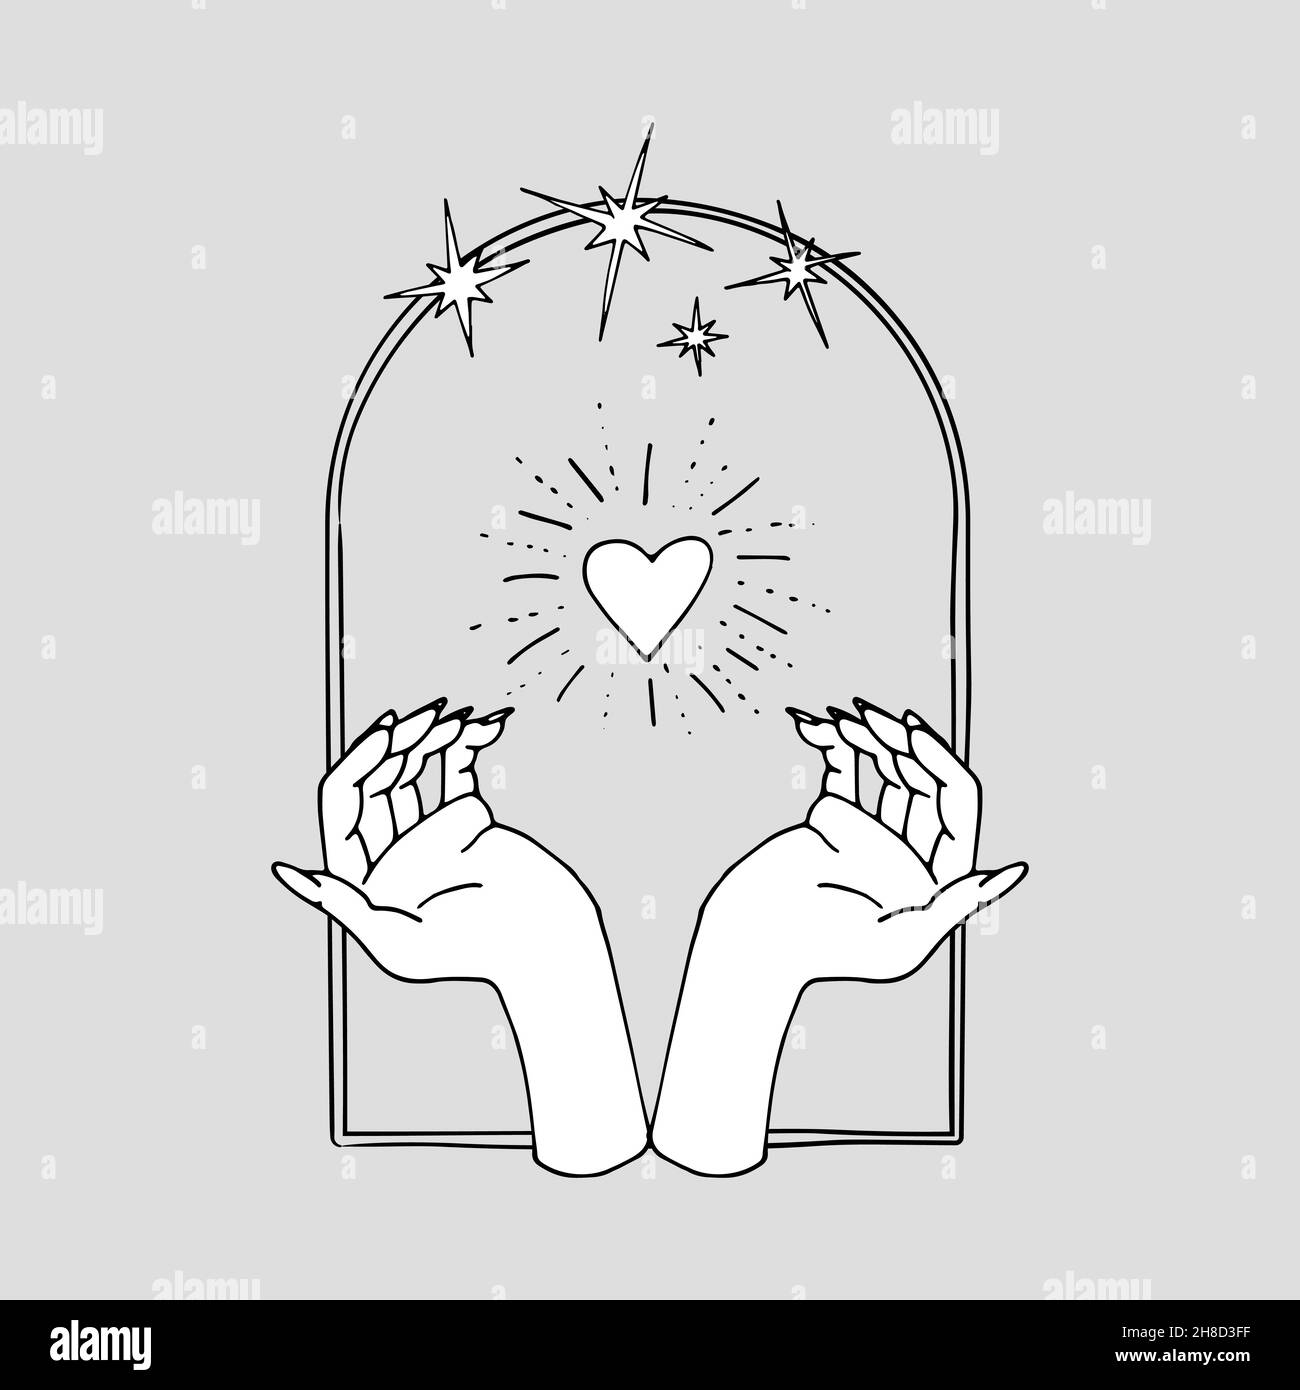 Vintage Mystic hands and shining heart inside arch with stars Stock Vector